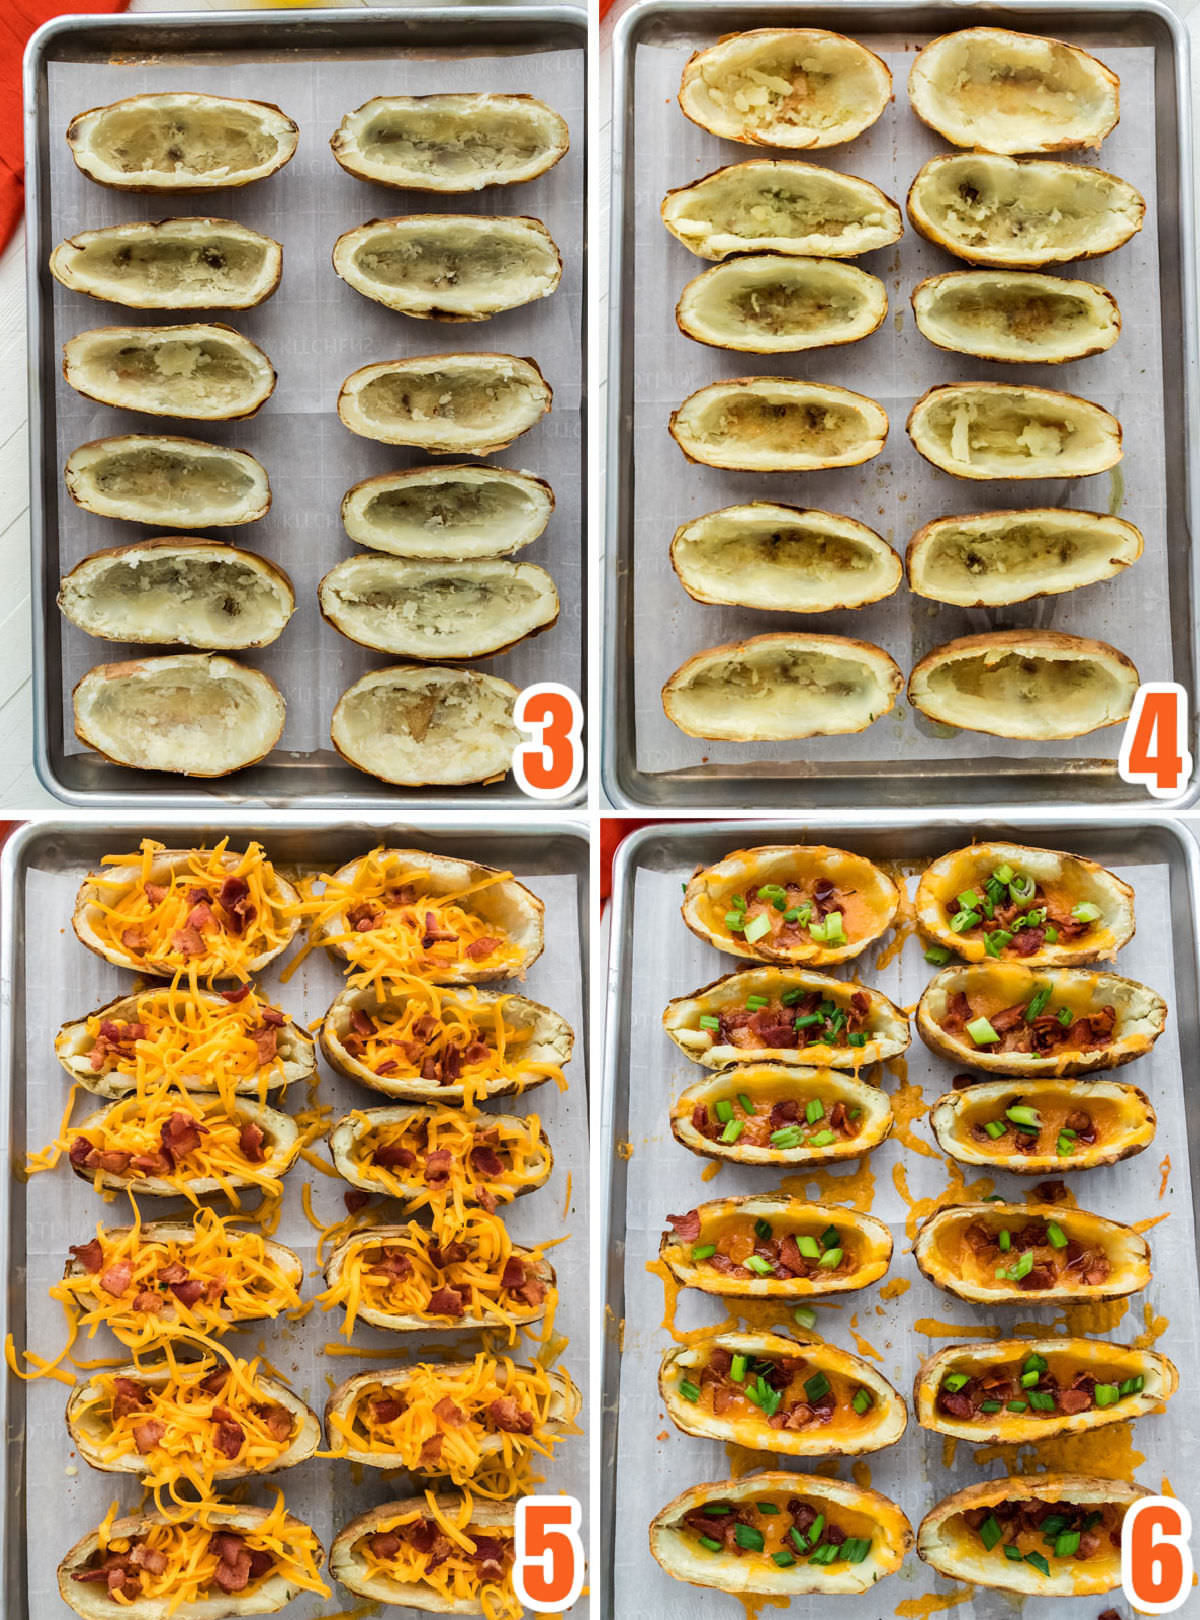 Collage image showing the steps for assembling the Potato Skins.